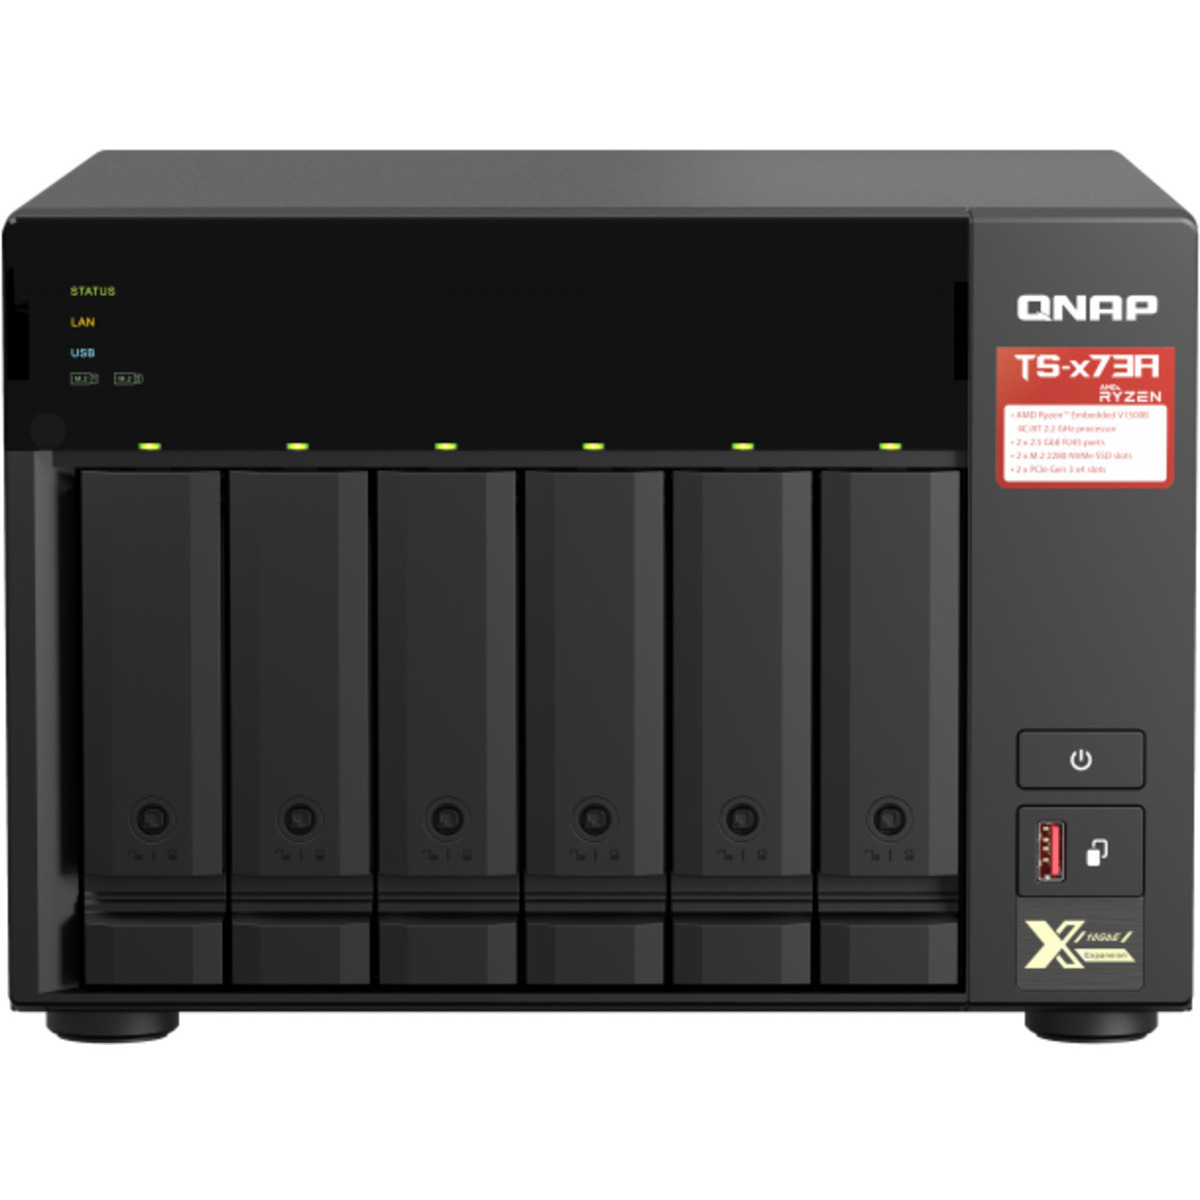 QNAP TS-673A 72tb 6-Bay Desktop Multimedia / Power User / Business NAS - Network Attached Storage Device 6x12tb Western Digital Ultrastar DC HC520 HUH721212ALE600 3.5 7200rpm SATA 6Gb/s HDD ENTERPRISE Class Drives Installed - Burn-In Tested TS-673A